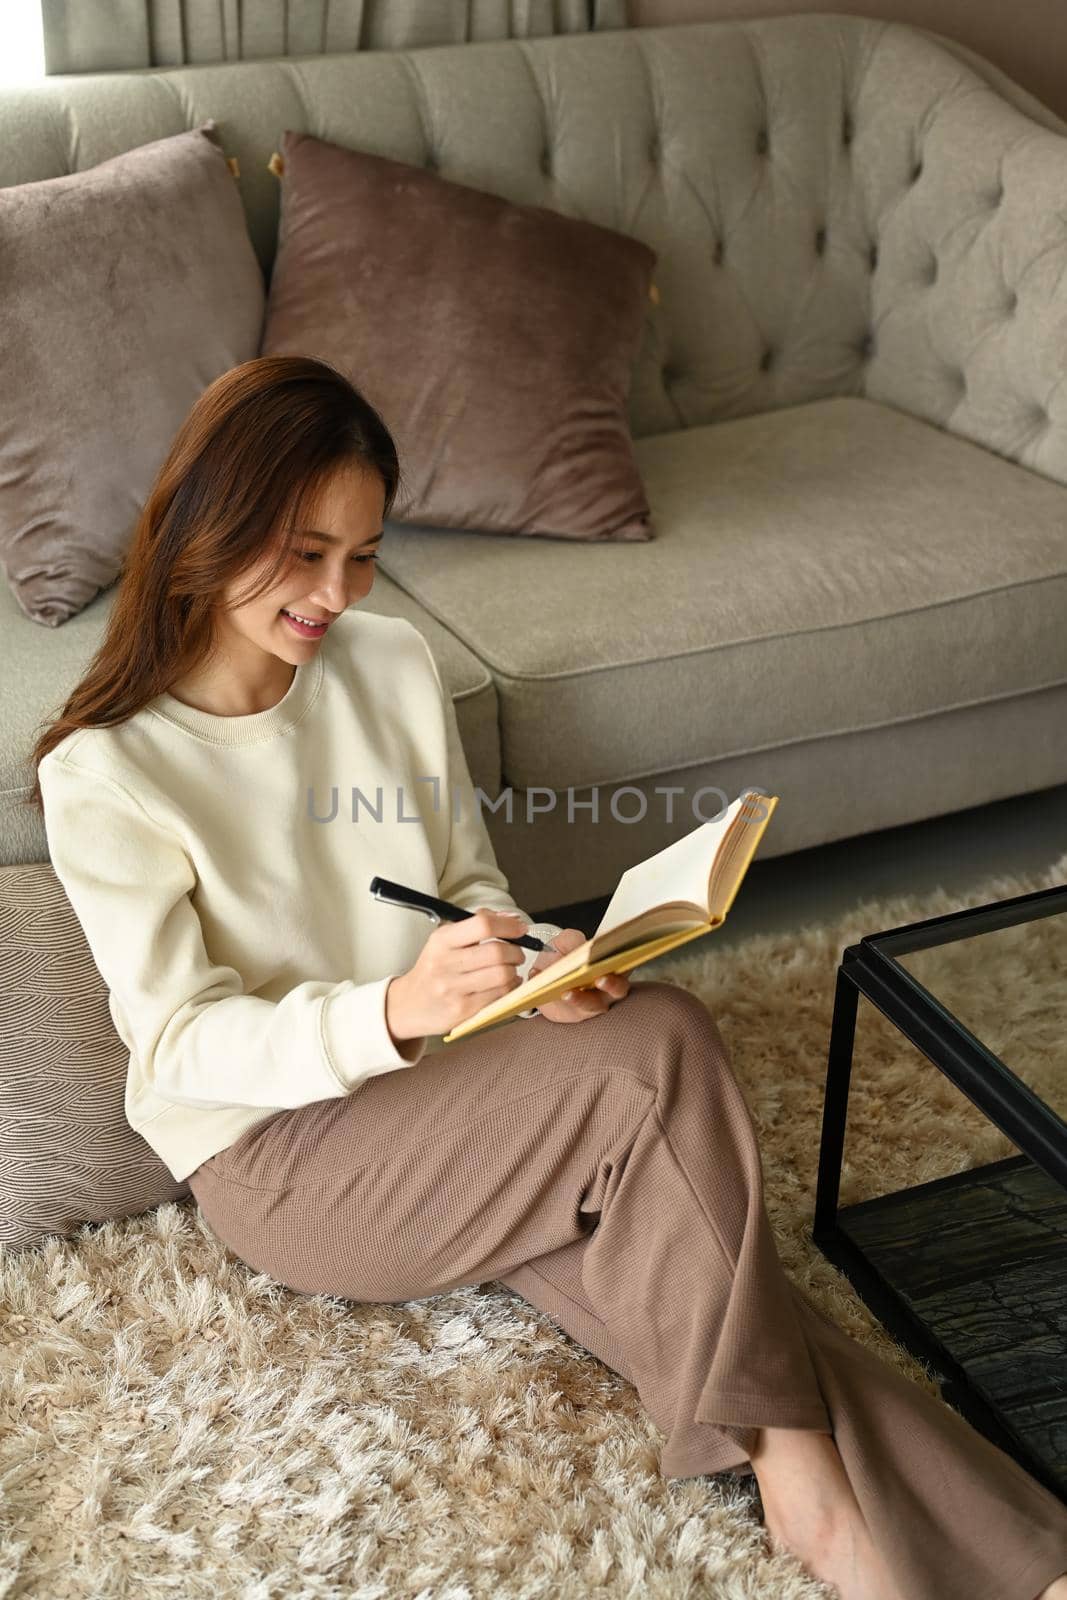 Pleasant young woman resting in cozy home and writing her diary. Leisure activity, positive mood concept.